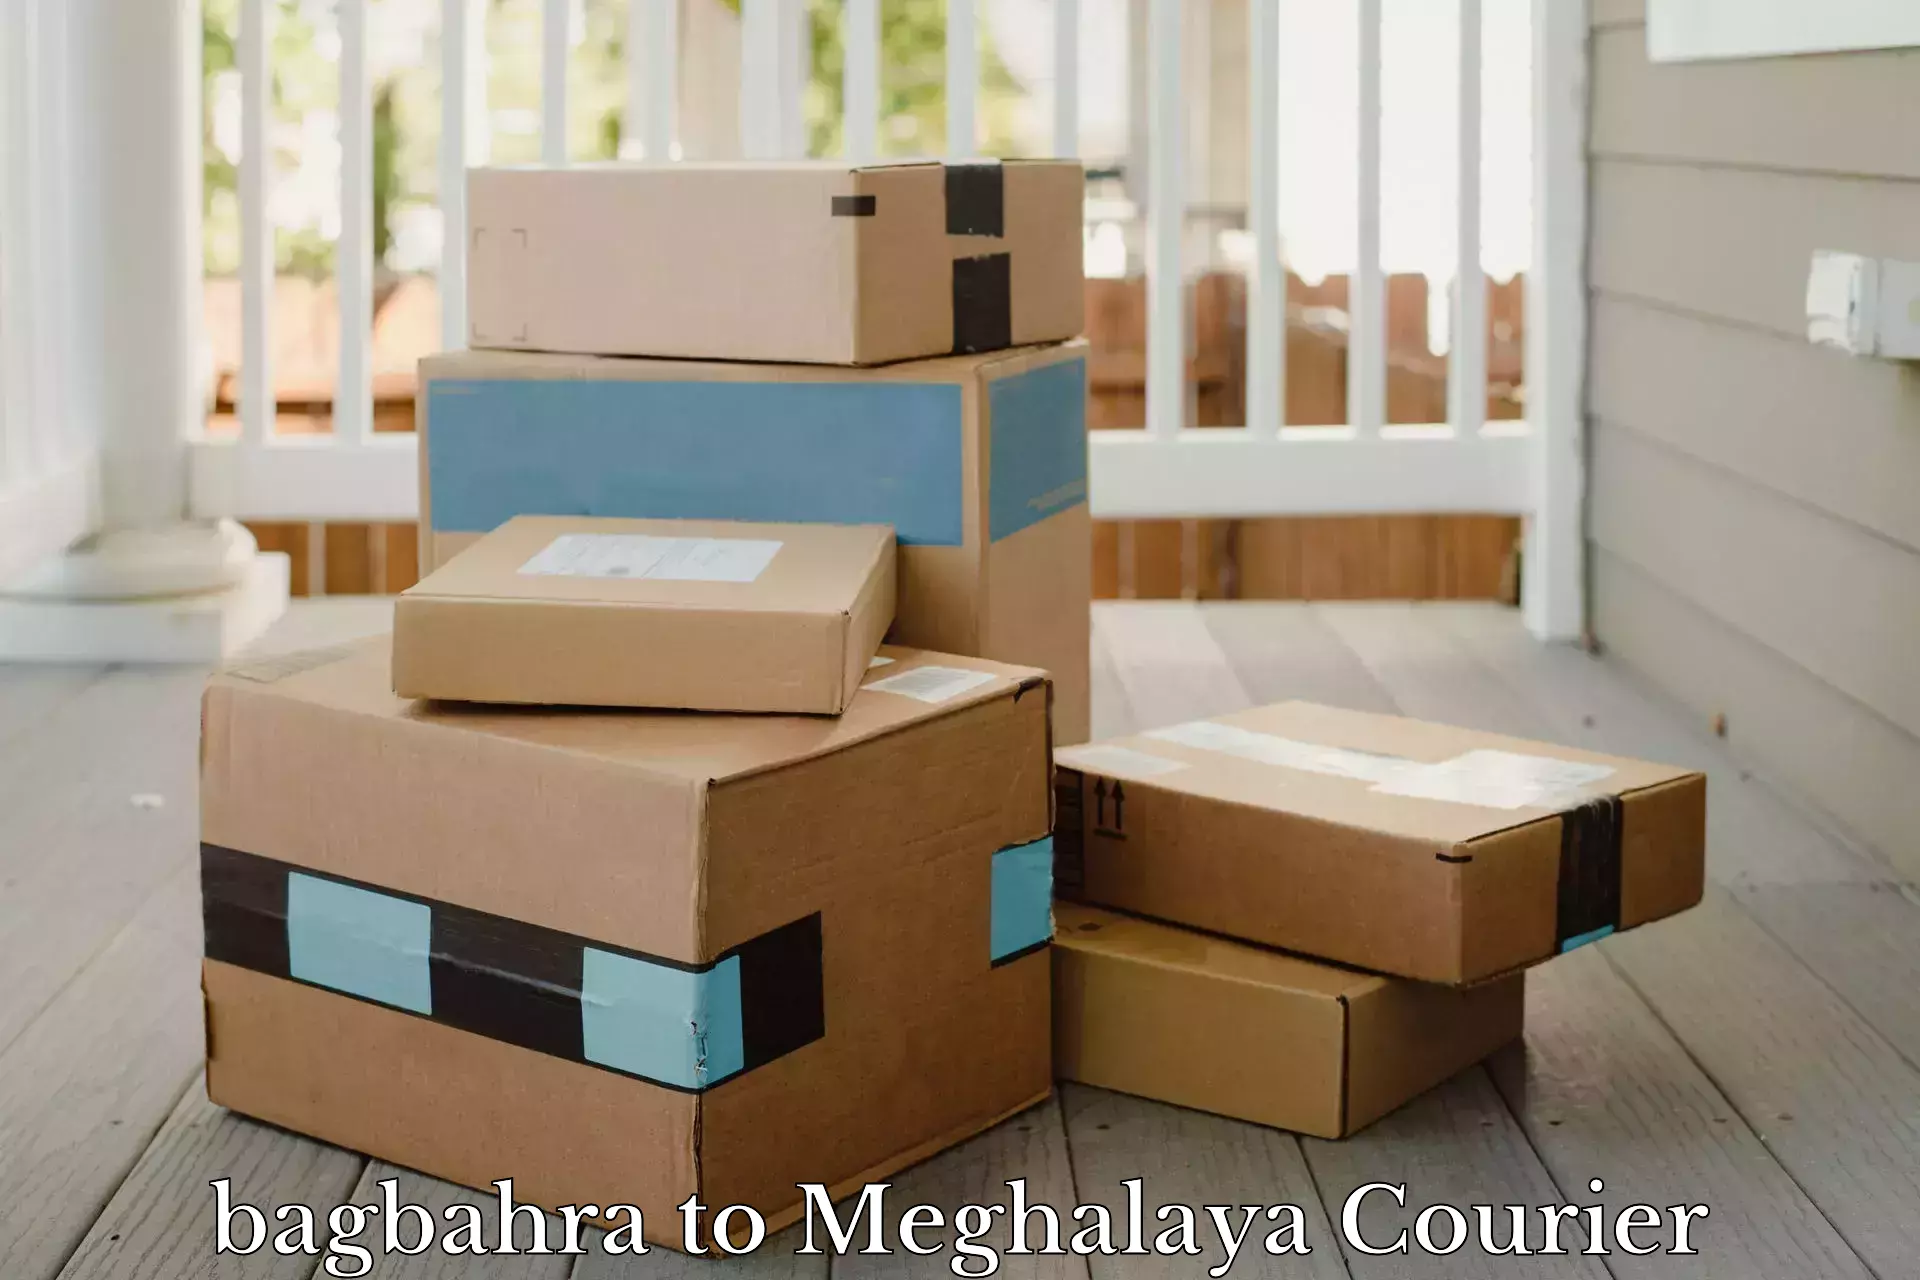 Reliable courier service bagbahra to Meghalaya